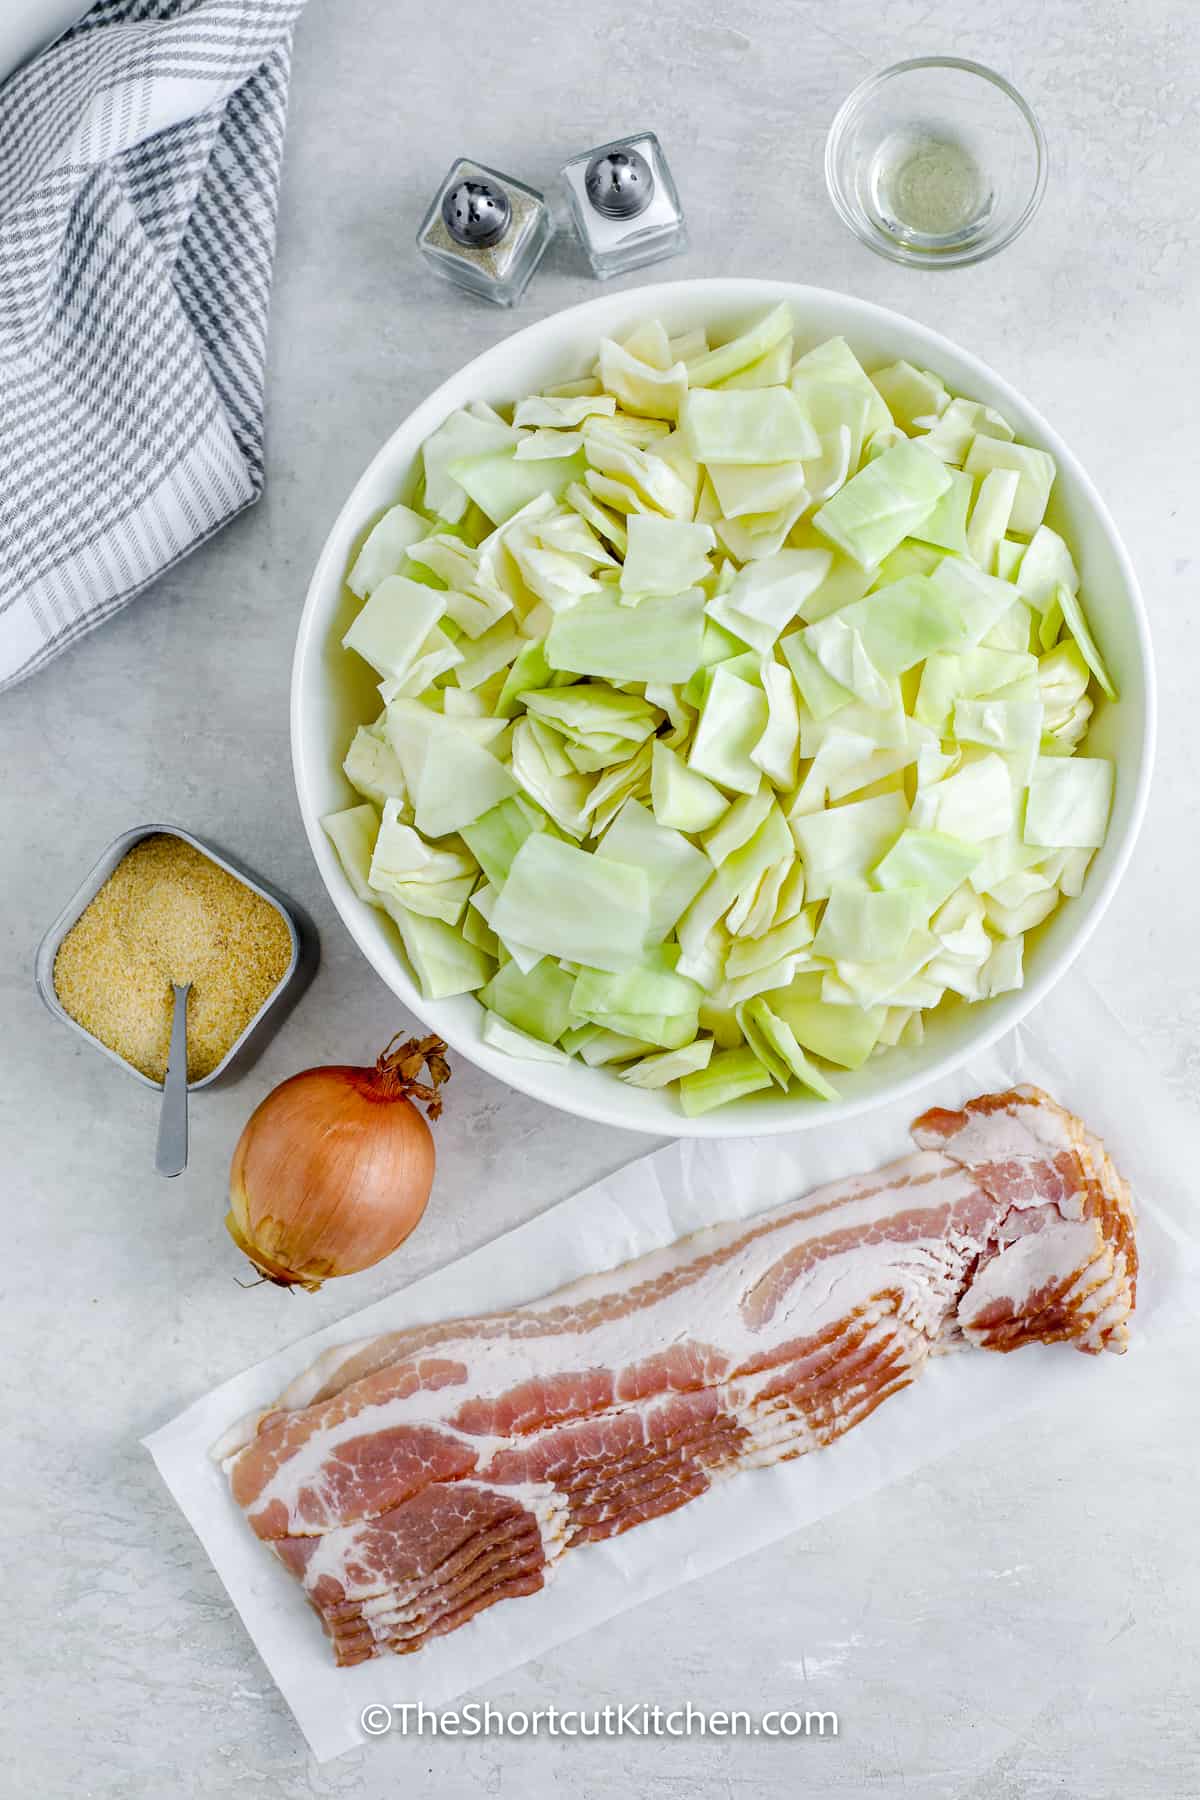 ingredients assembled to make fried cabbage with bacon